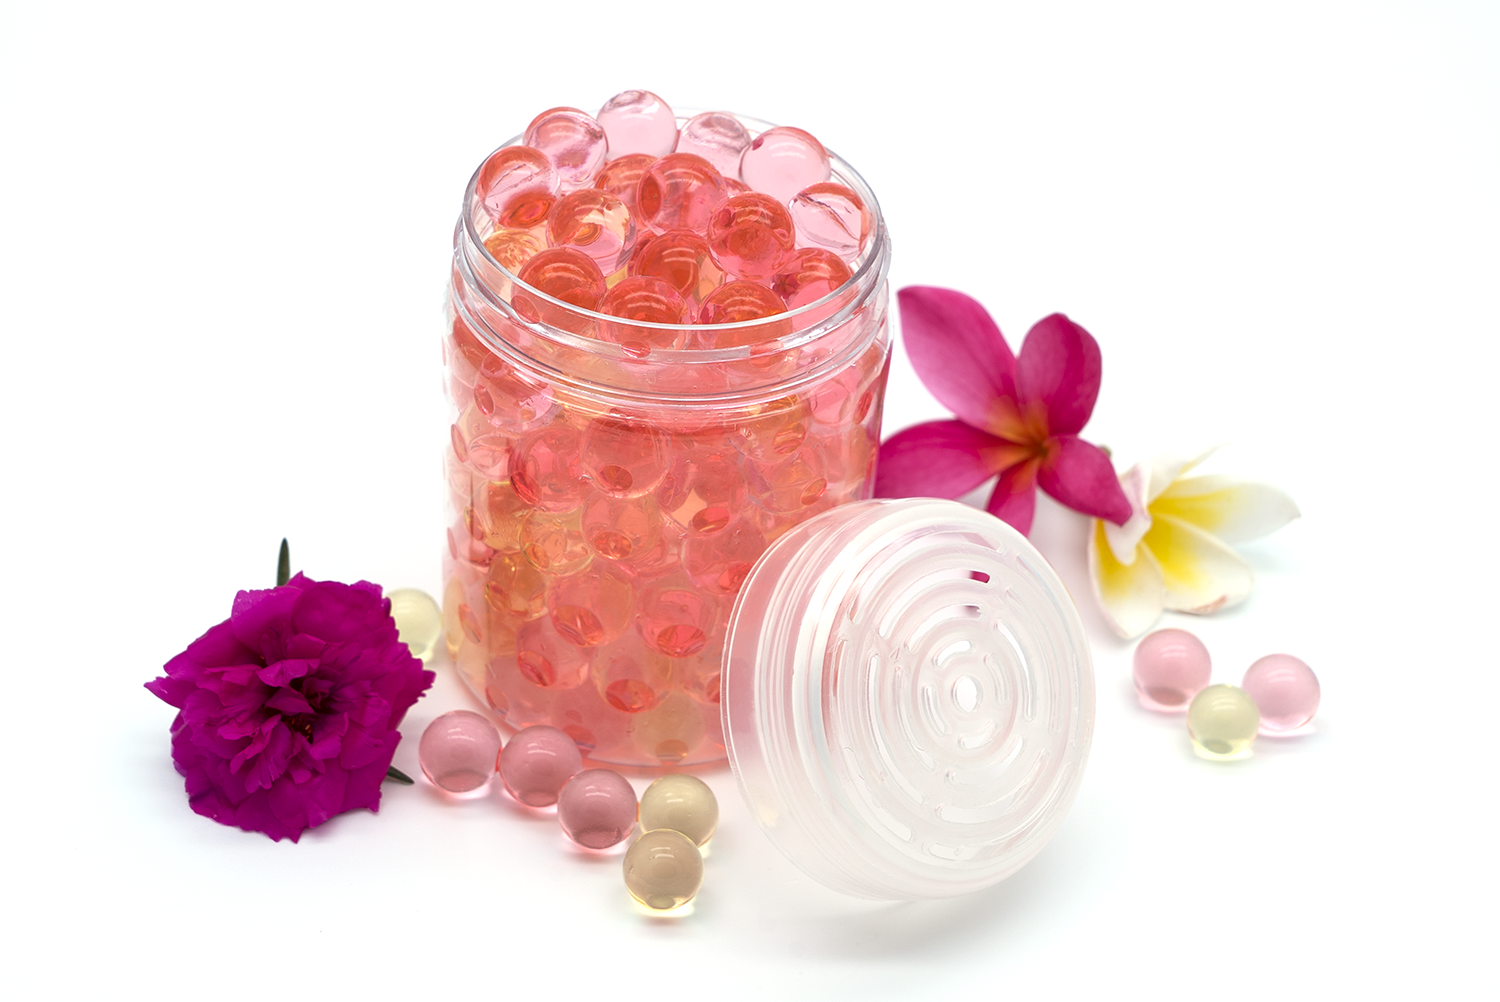 Demi friendly fragrance beads to make office more unique and beautiful for office